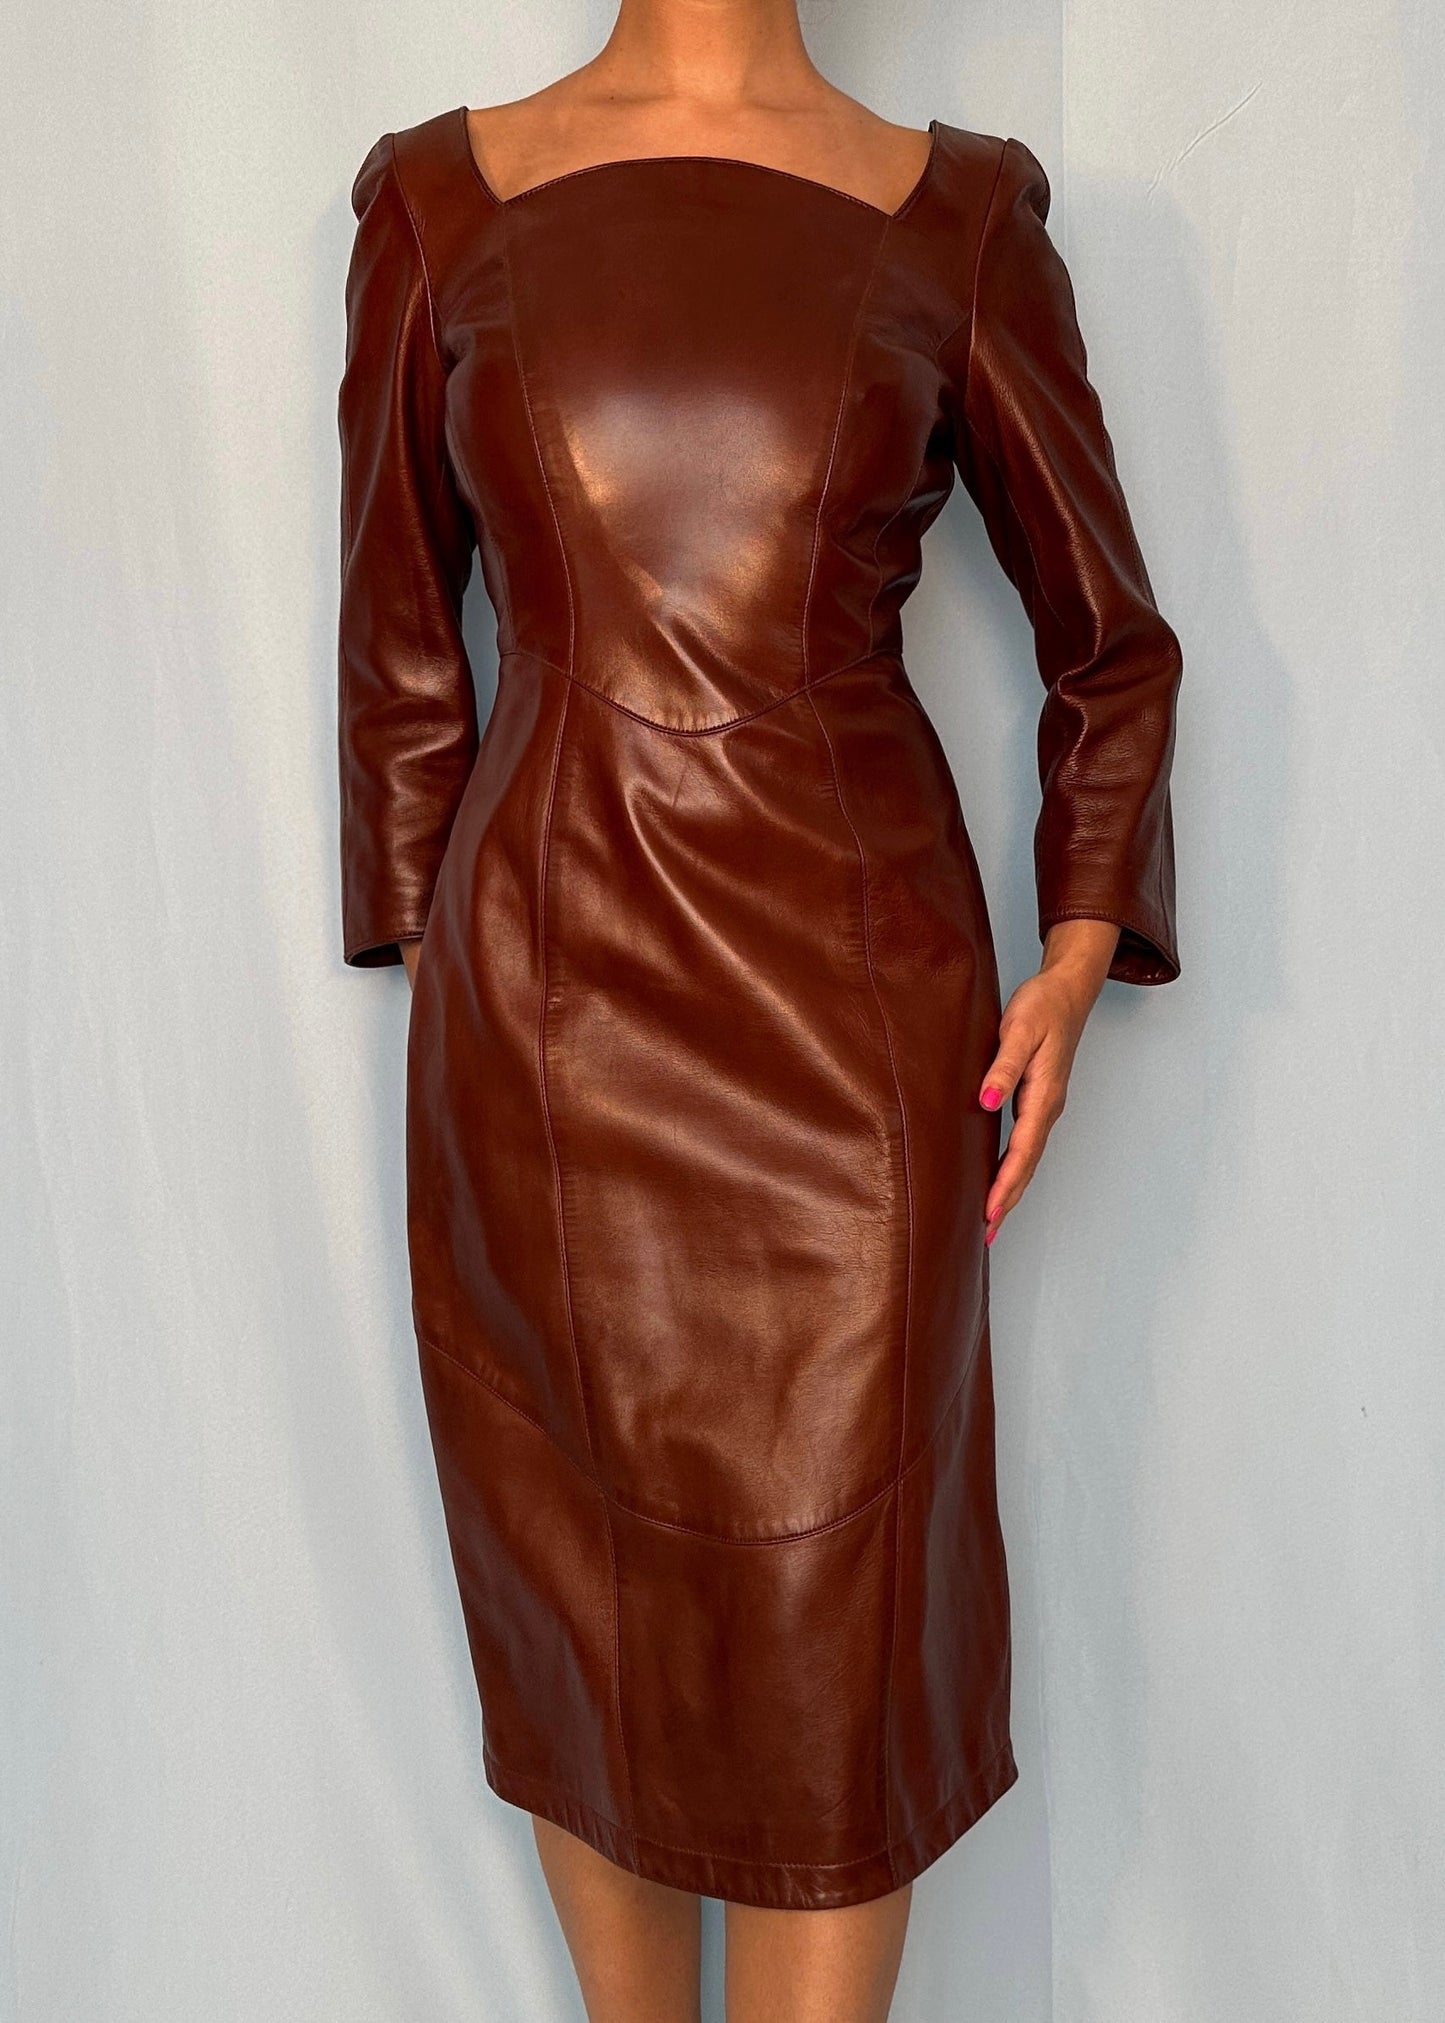 Thierry Mugler Brown Leather Contour Dress